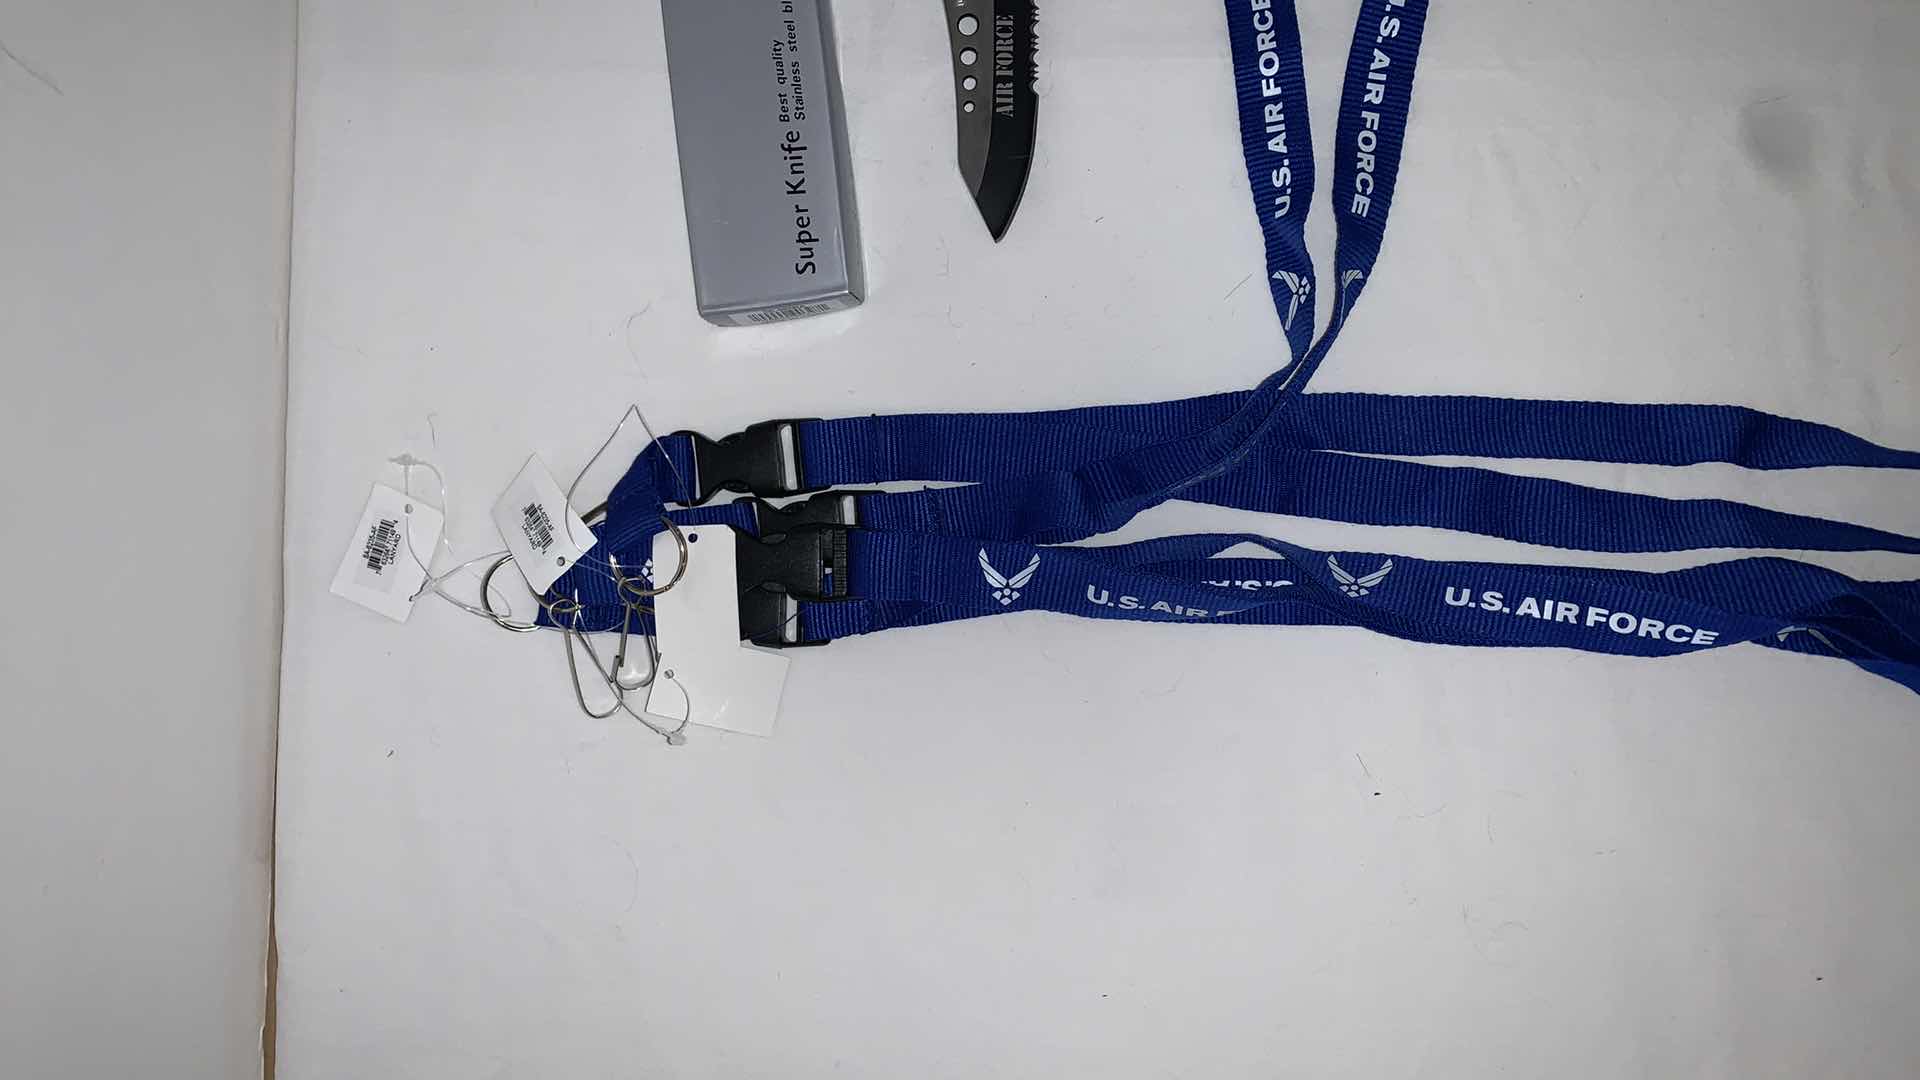 Photo 2 of SET OF U.S. AIR FORCE LANYARDS WITH SUPER KNIFE AIR FORCE KNIFE